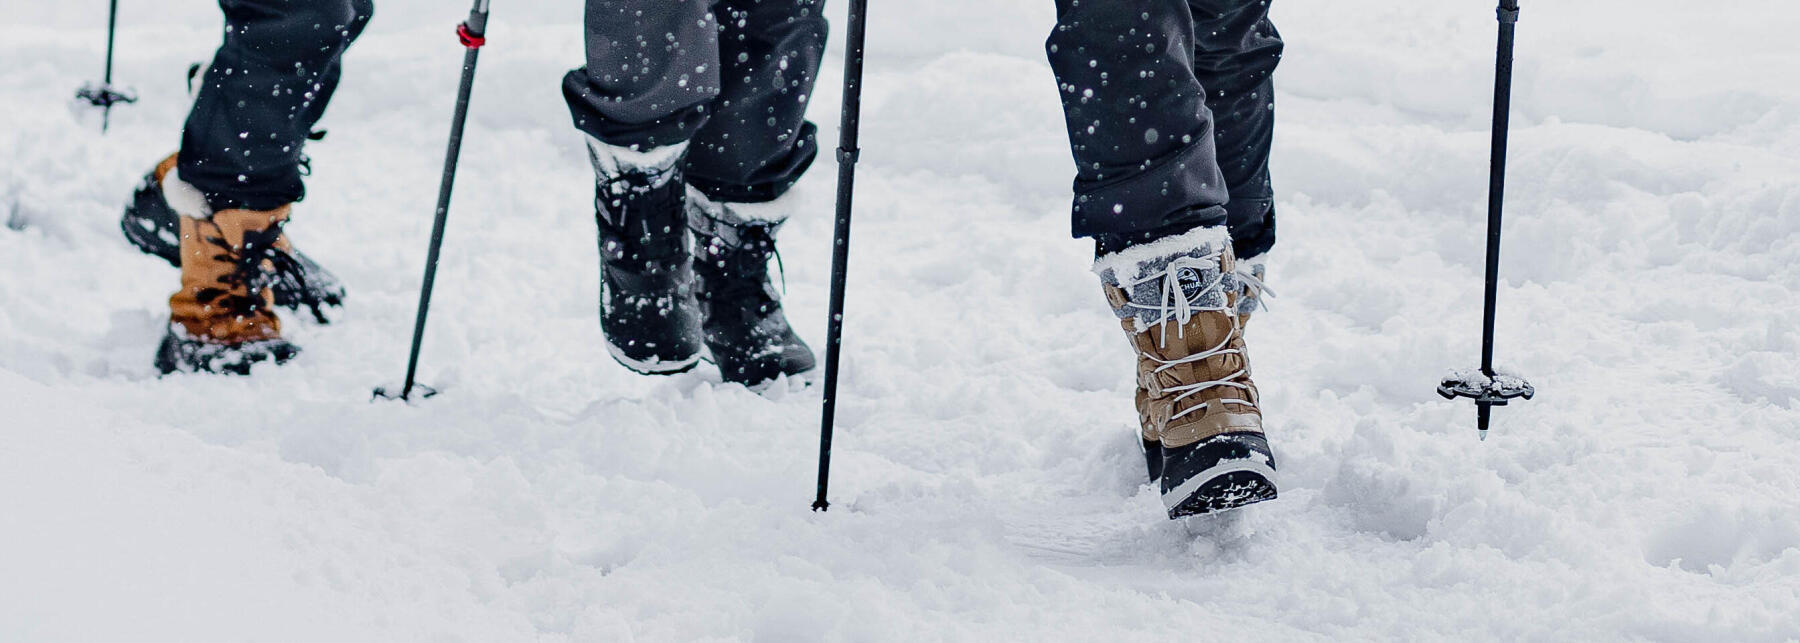 How to choose warm or après-ski boots?